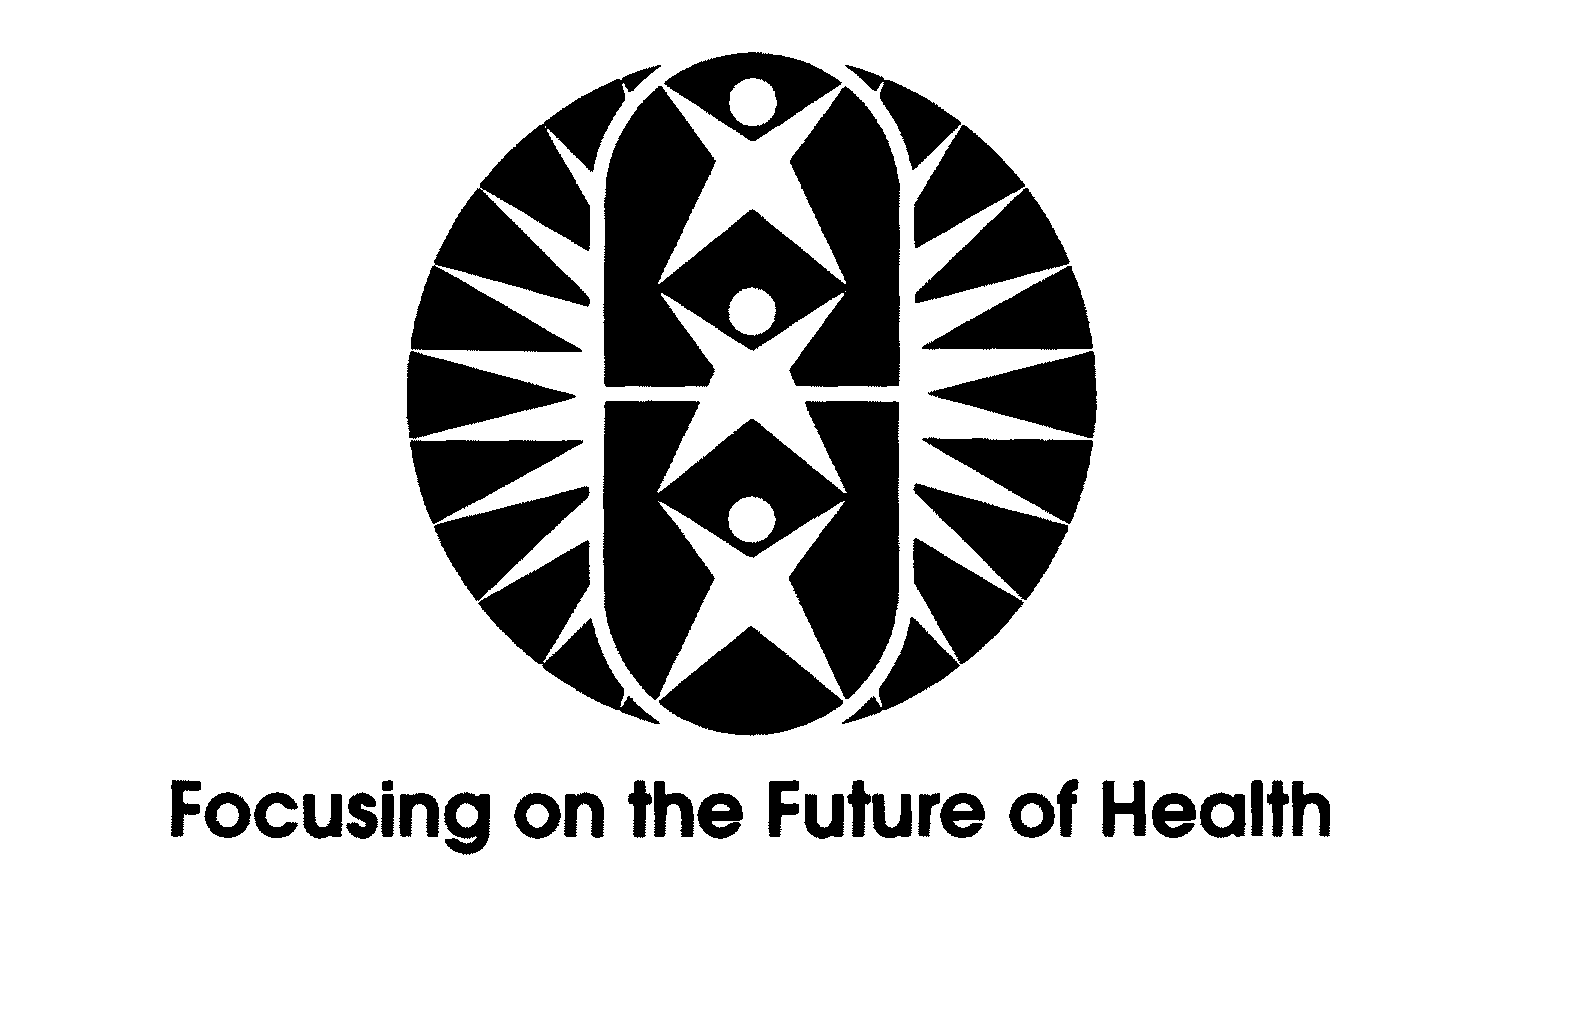  FOCUSING ON THE FUTURE OF HEALTH